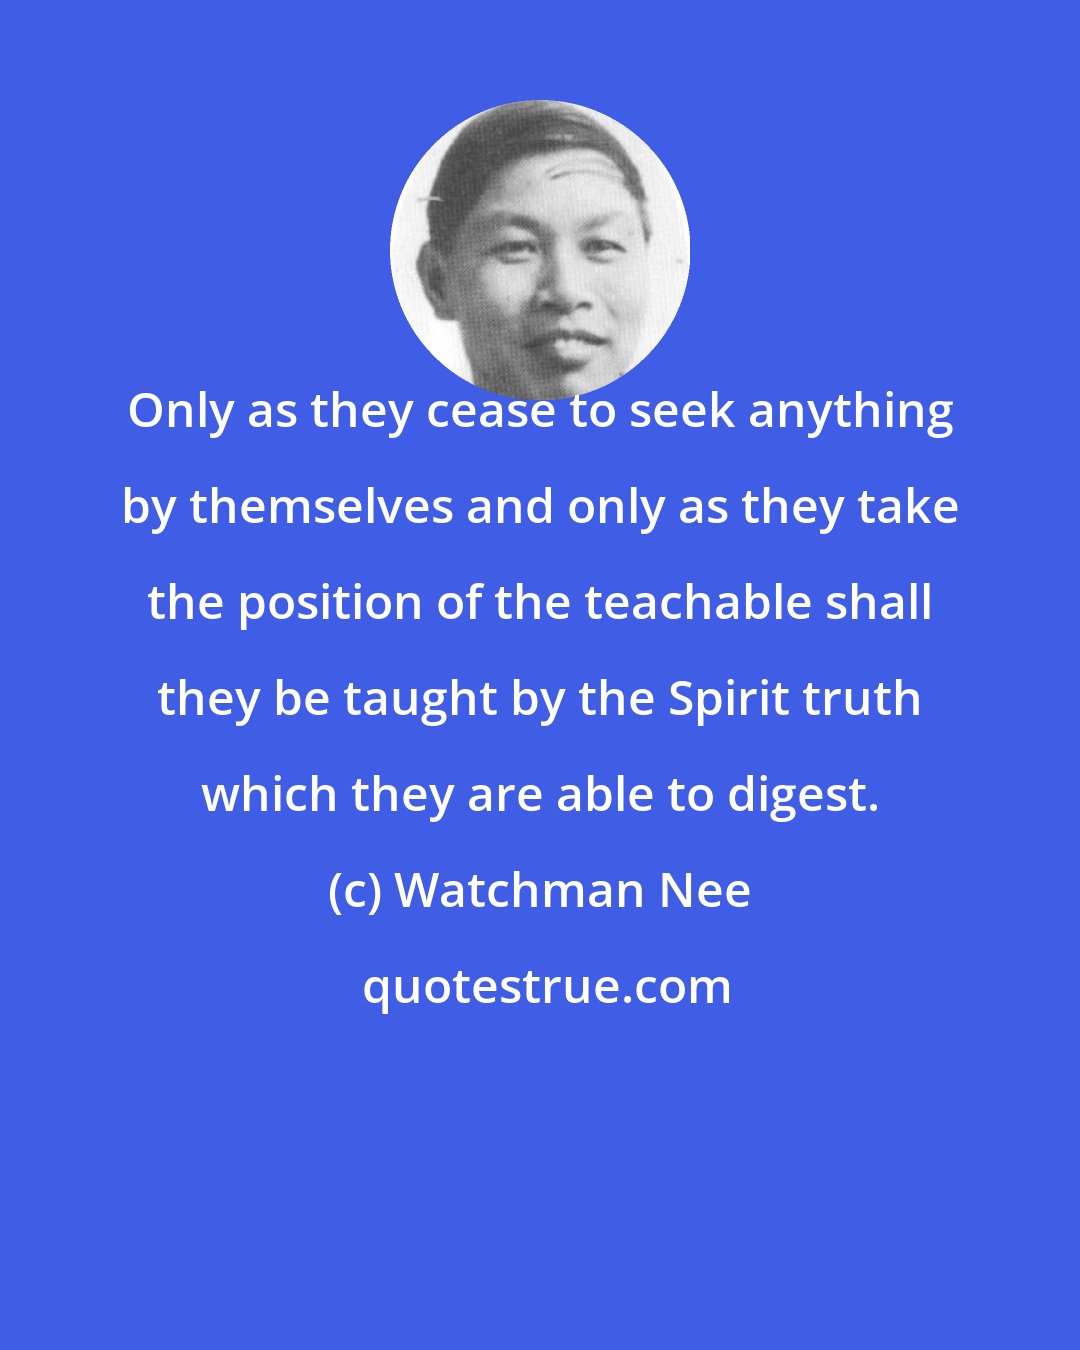 Watchman Nee: Only as they cease to seek anything by themselves and only as they take the position of the teachable shall they be taught by the Spirit truth which they are able to digest.